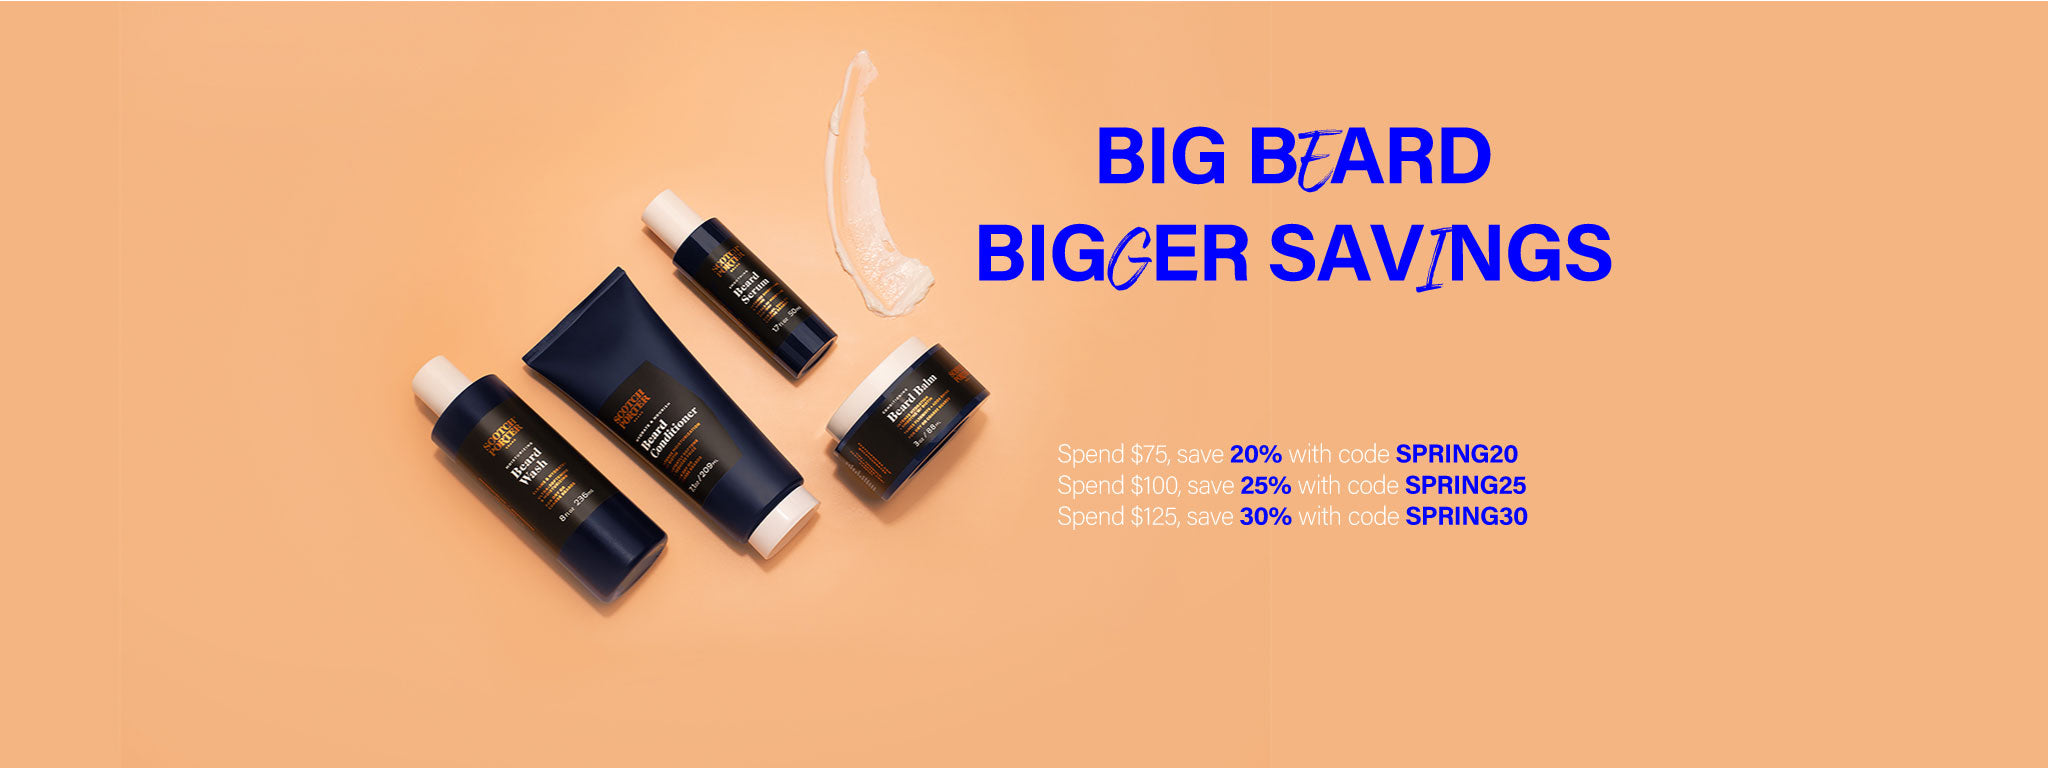 Beard care products with discount codes, offering savings based on spending tiers. Tier 1: Spend $75, save 20% with code SPRING20. Tier 2: Spend $100, save 25% with code SPRING25. Tier 3: Spend $125, save 30% with code SPRING30.